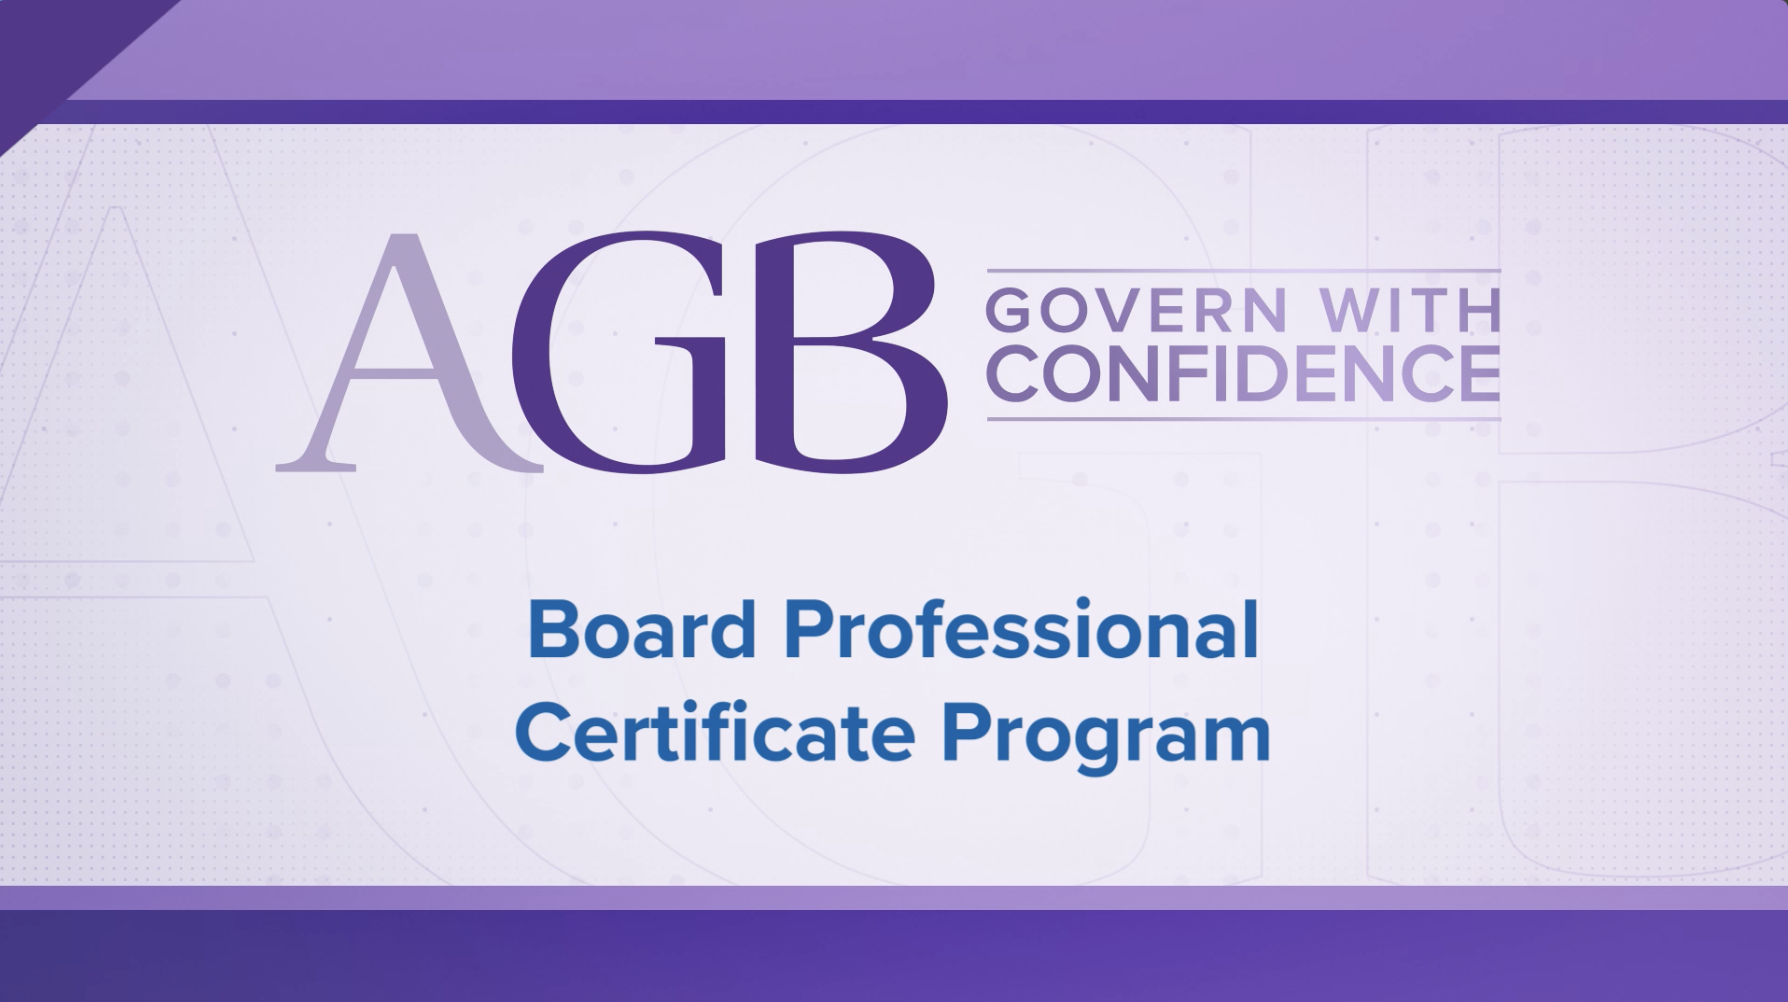 Board Professional Certificate Program from AGB